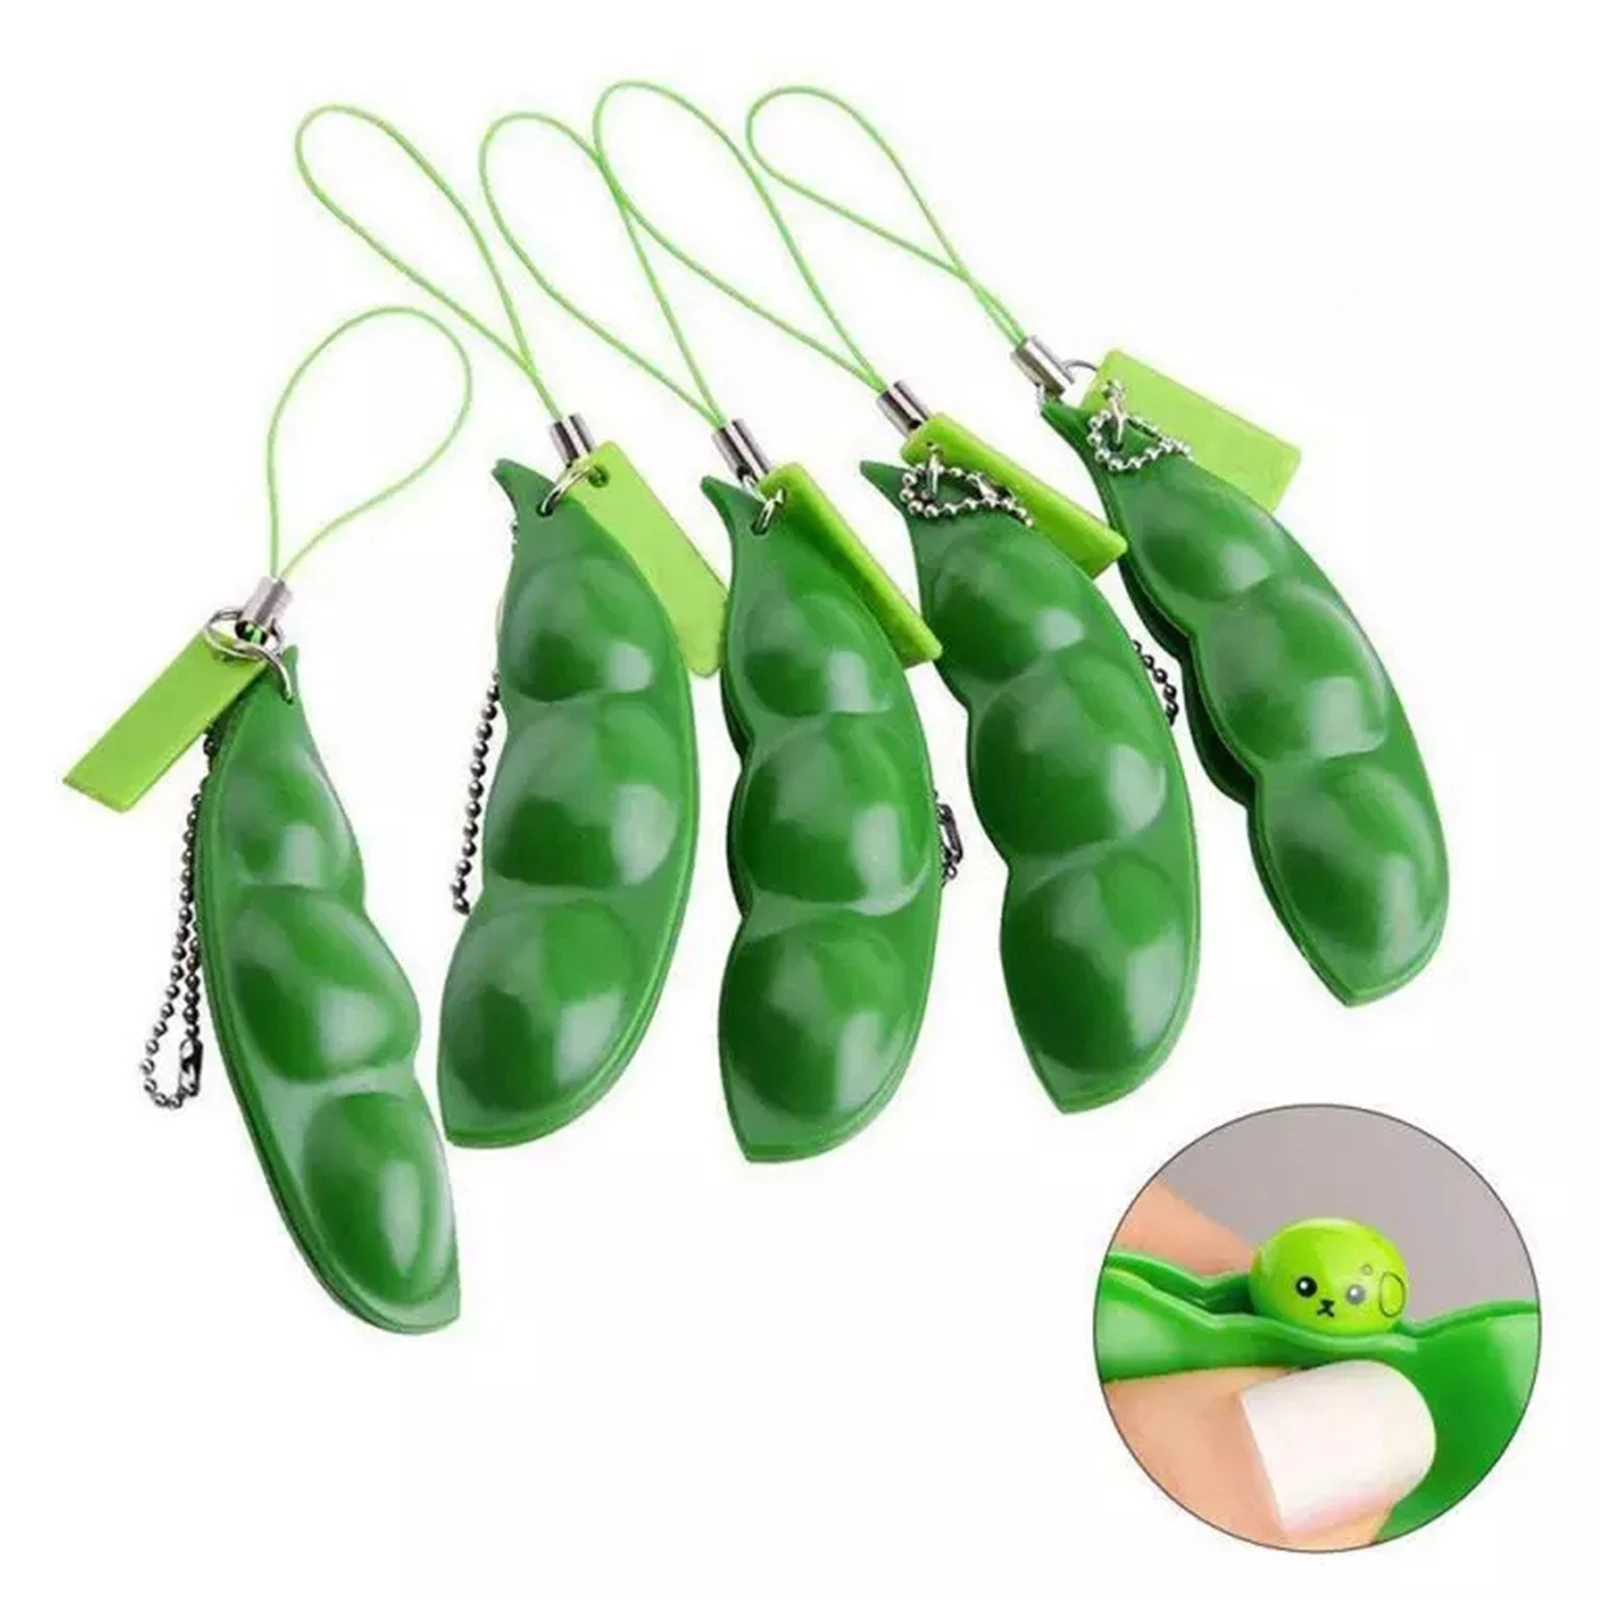 

5x Stress Toy Plastic Green Squish Squeeze Bean Pressure Stress Reliever Fidget Sensory Decompression Toy Gift